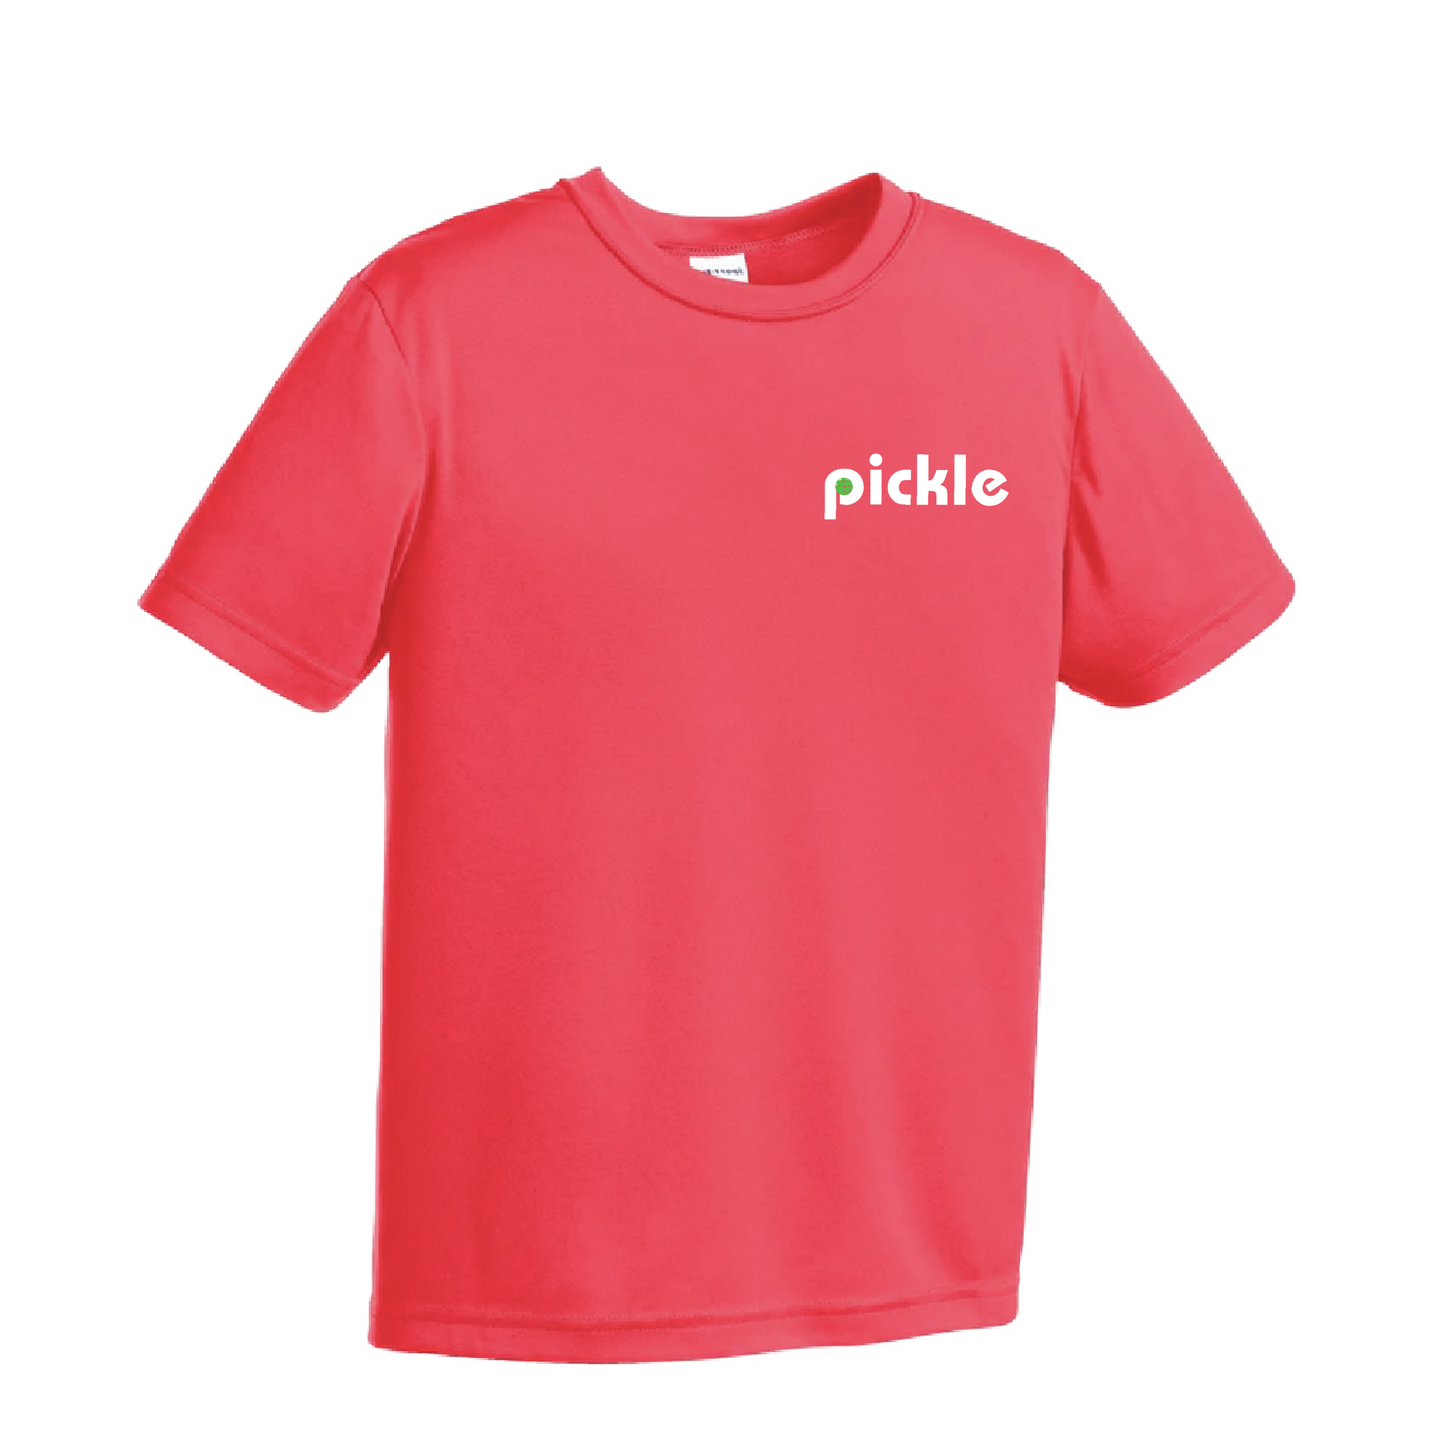 Lightweight, relaxed, and excellent breathability are the hallmarks of our Pickleball shirts. Extra-durable PosiCharge technology ensures vibrant colors that won't fade, so your logo stays bright! Plus, its removable tag and set-in sleeves make it comfortable to wear all day.